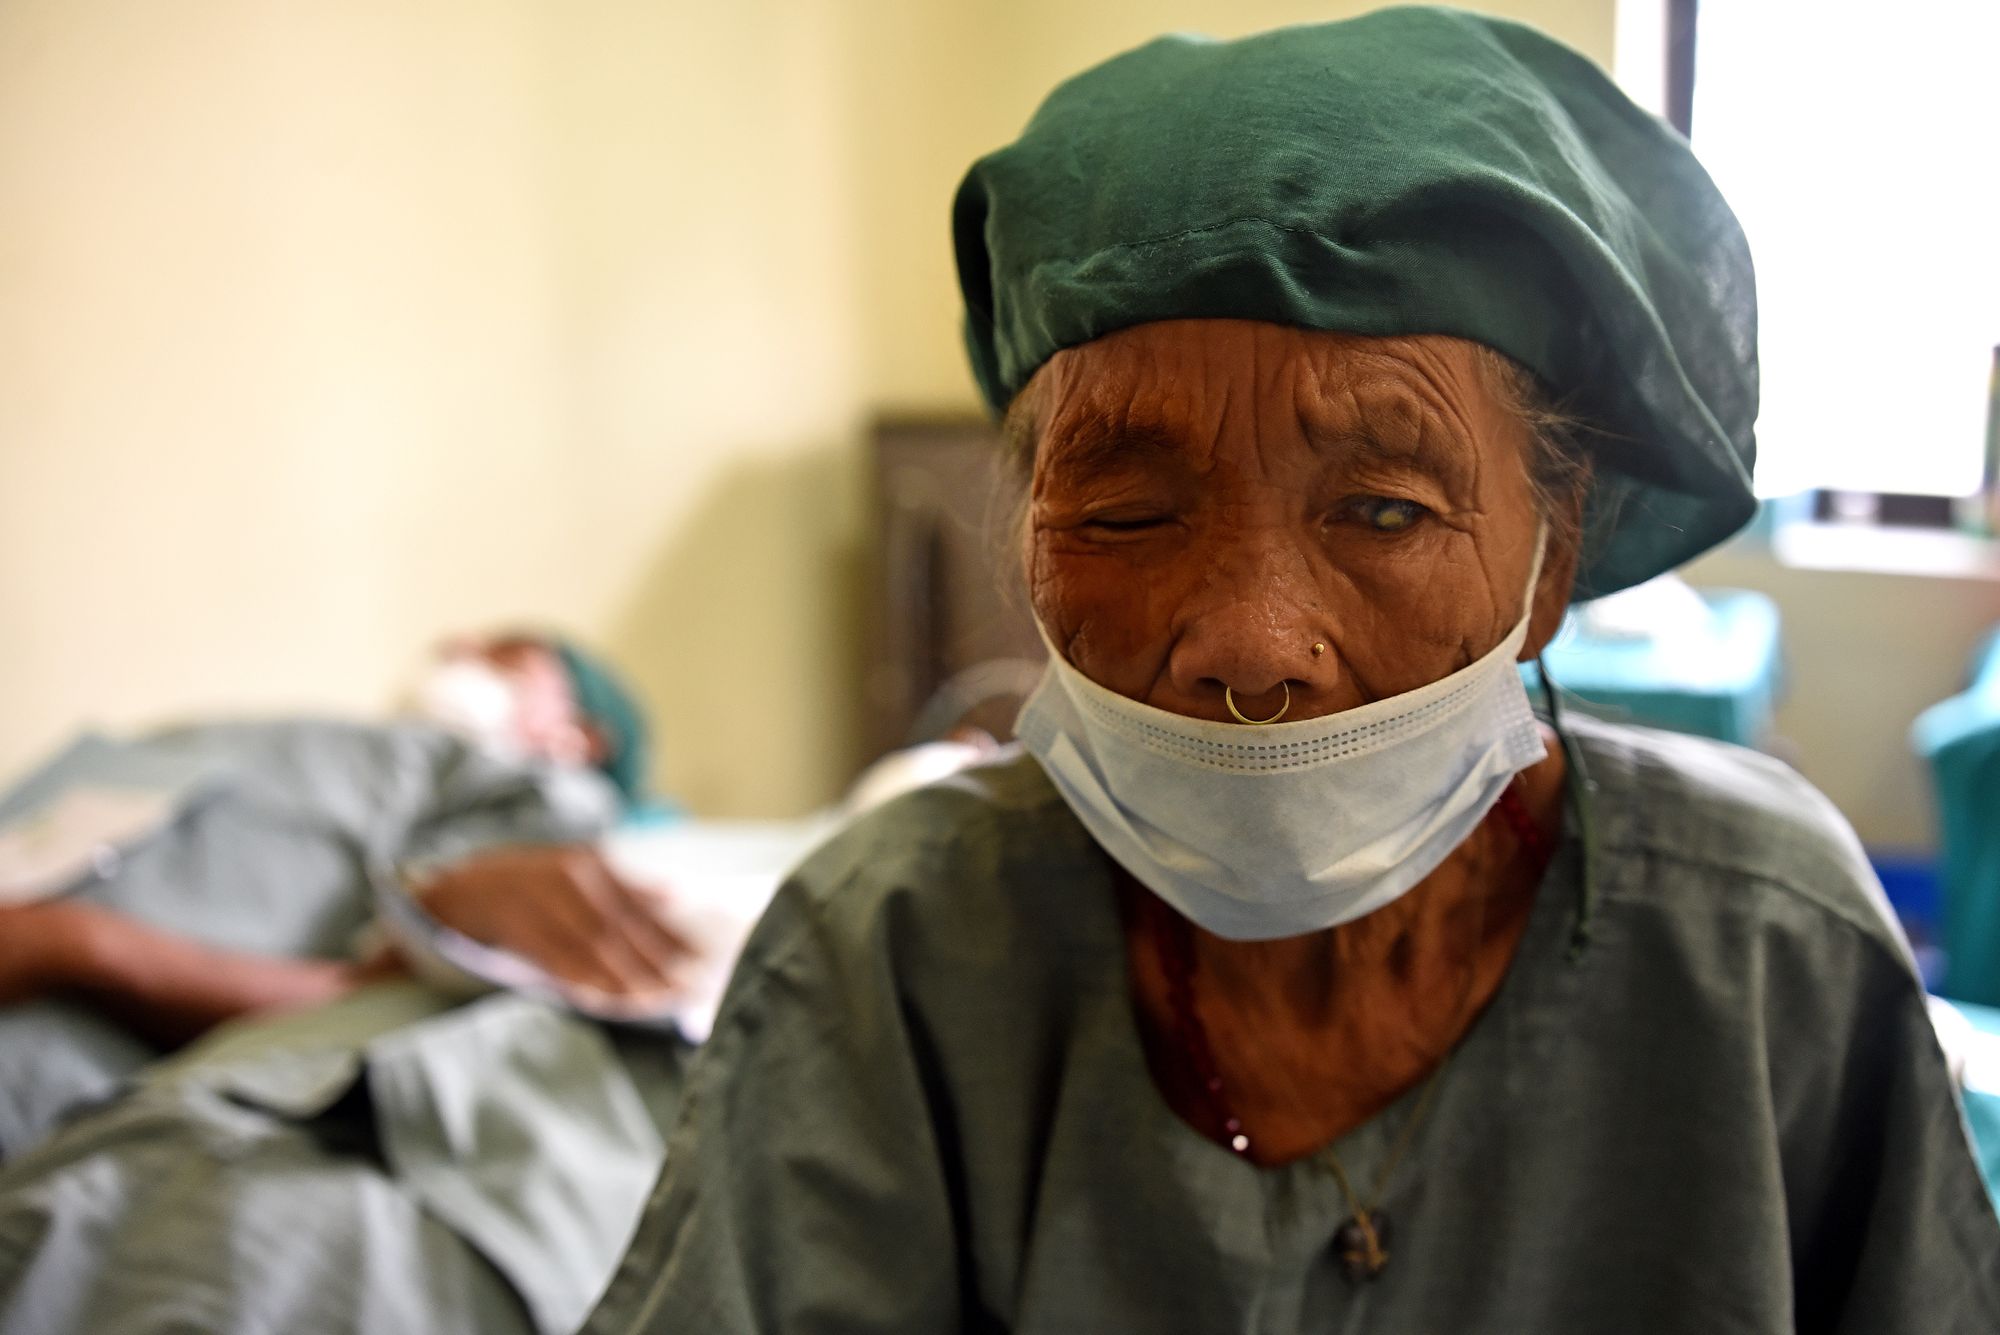 A close up photo of a female patient with cataracts in a hospital room